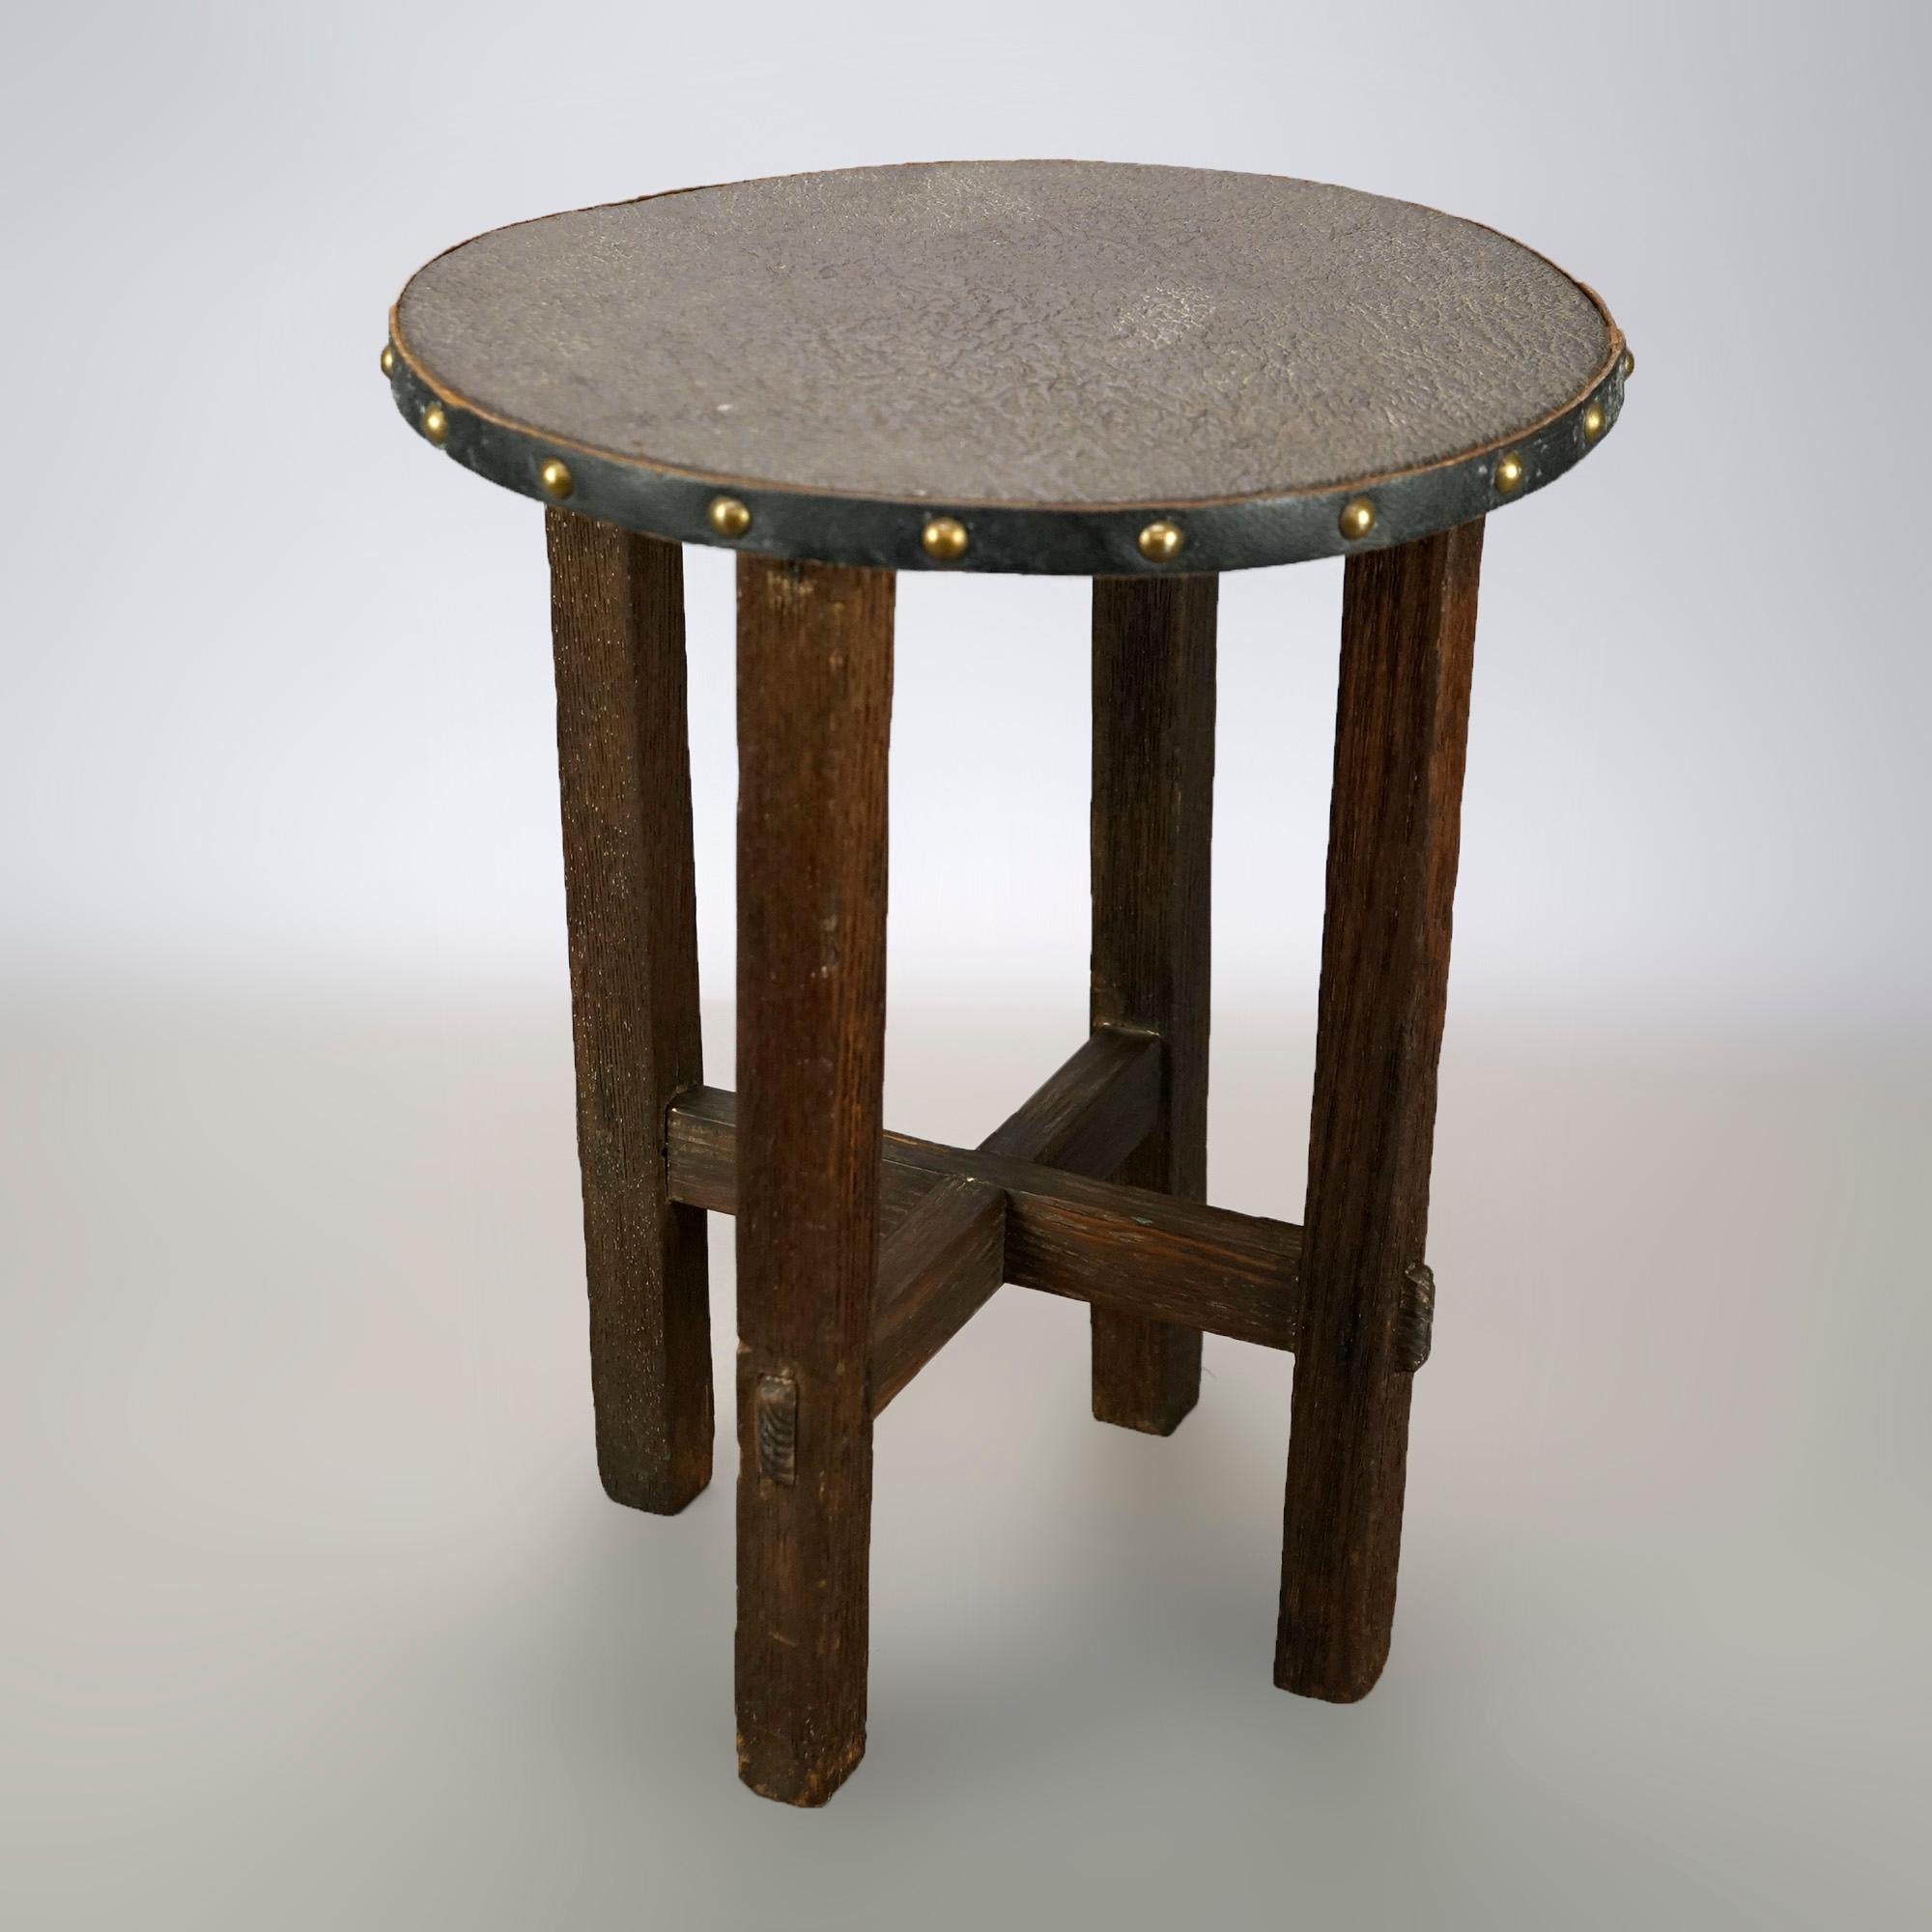 An antique Arts and Crafts Mission taboret stand offers oak construction with leather covered top raised on straight and square legs having x-form stretcher, c1910

Measures- 17.5''H x 14.25''W x 14.25''D.